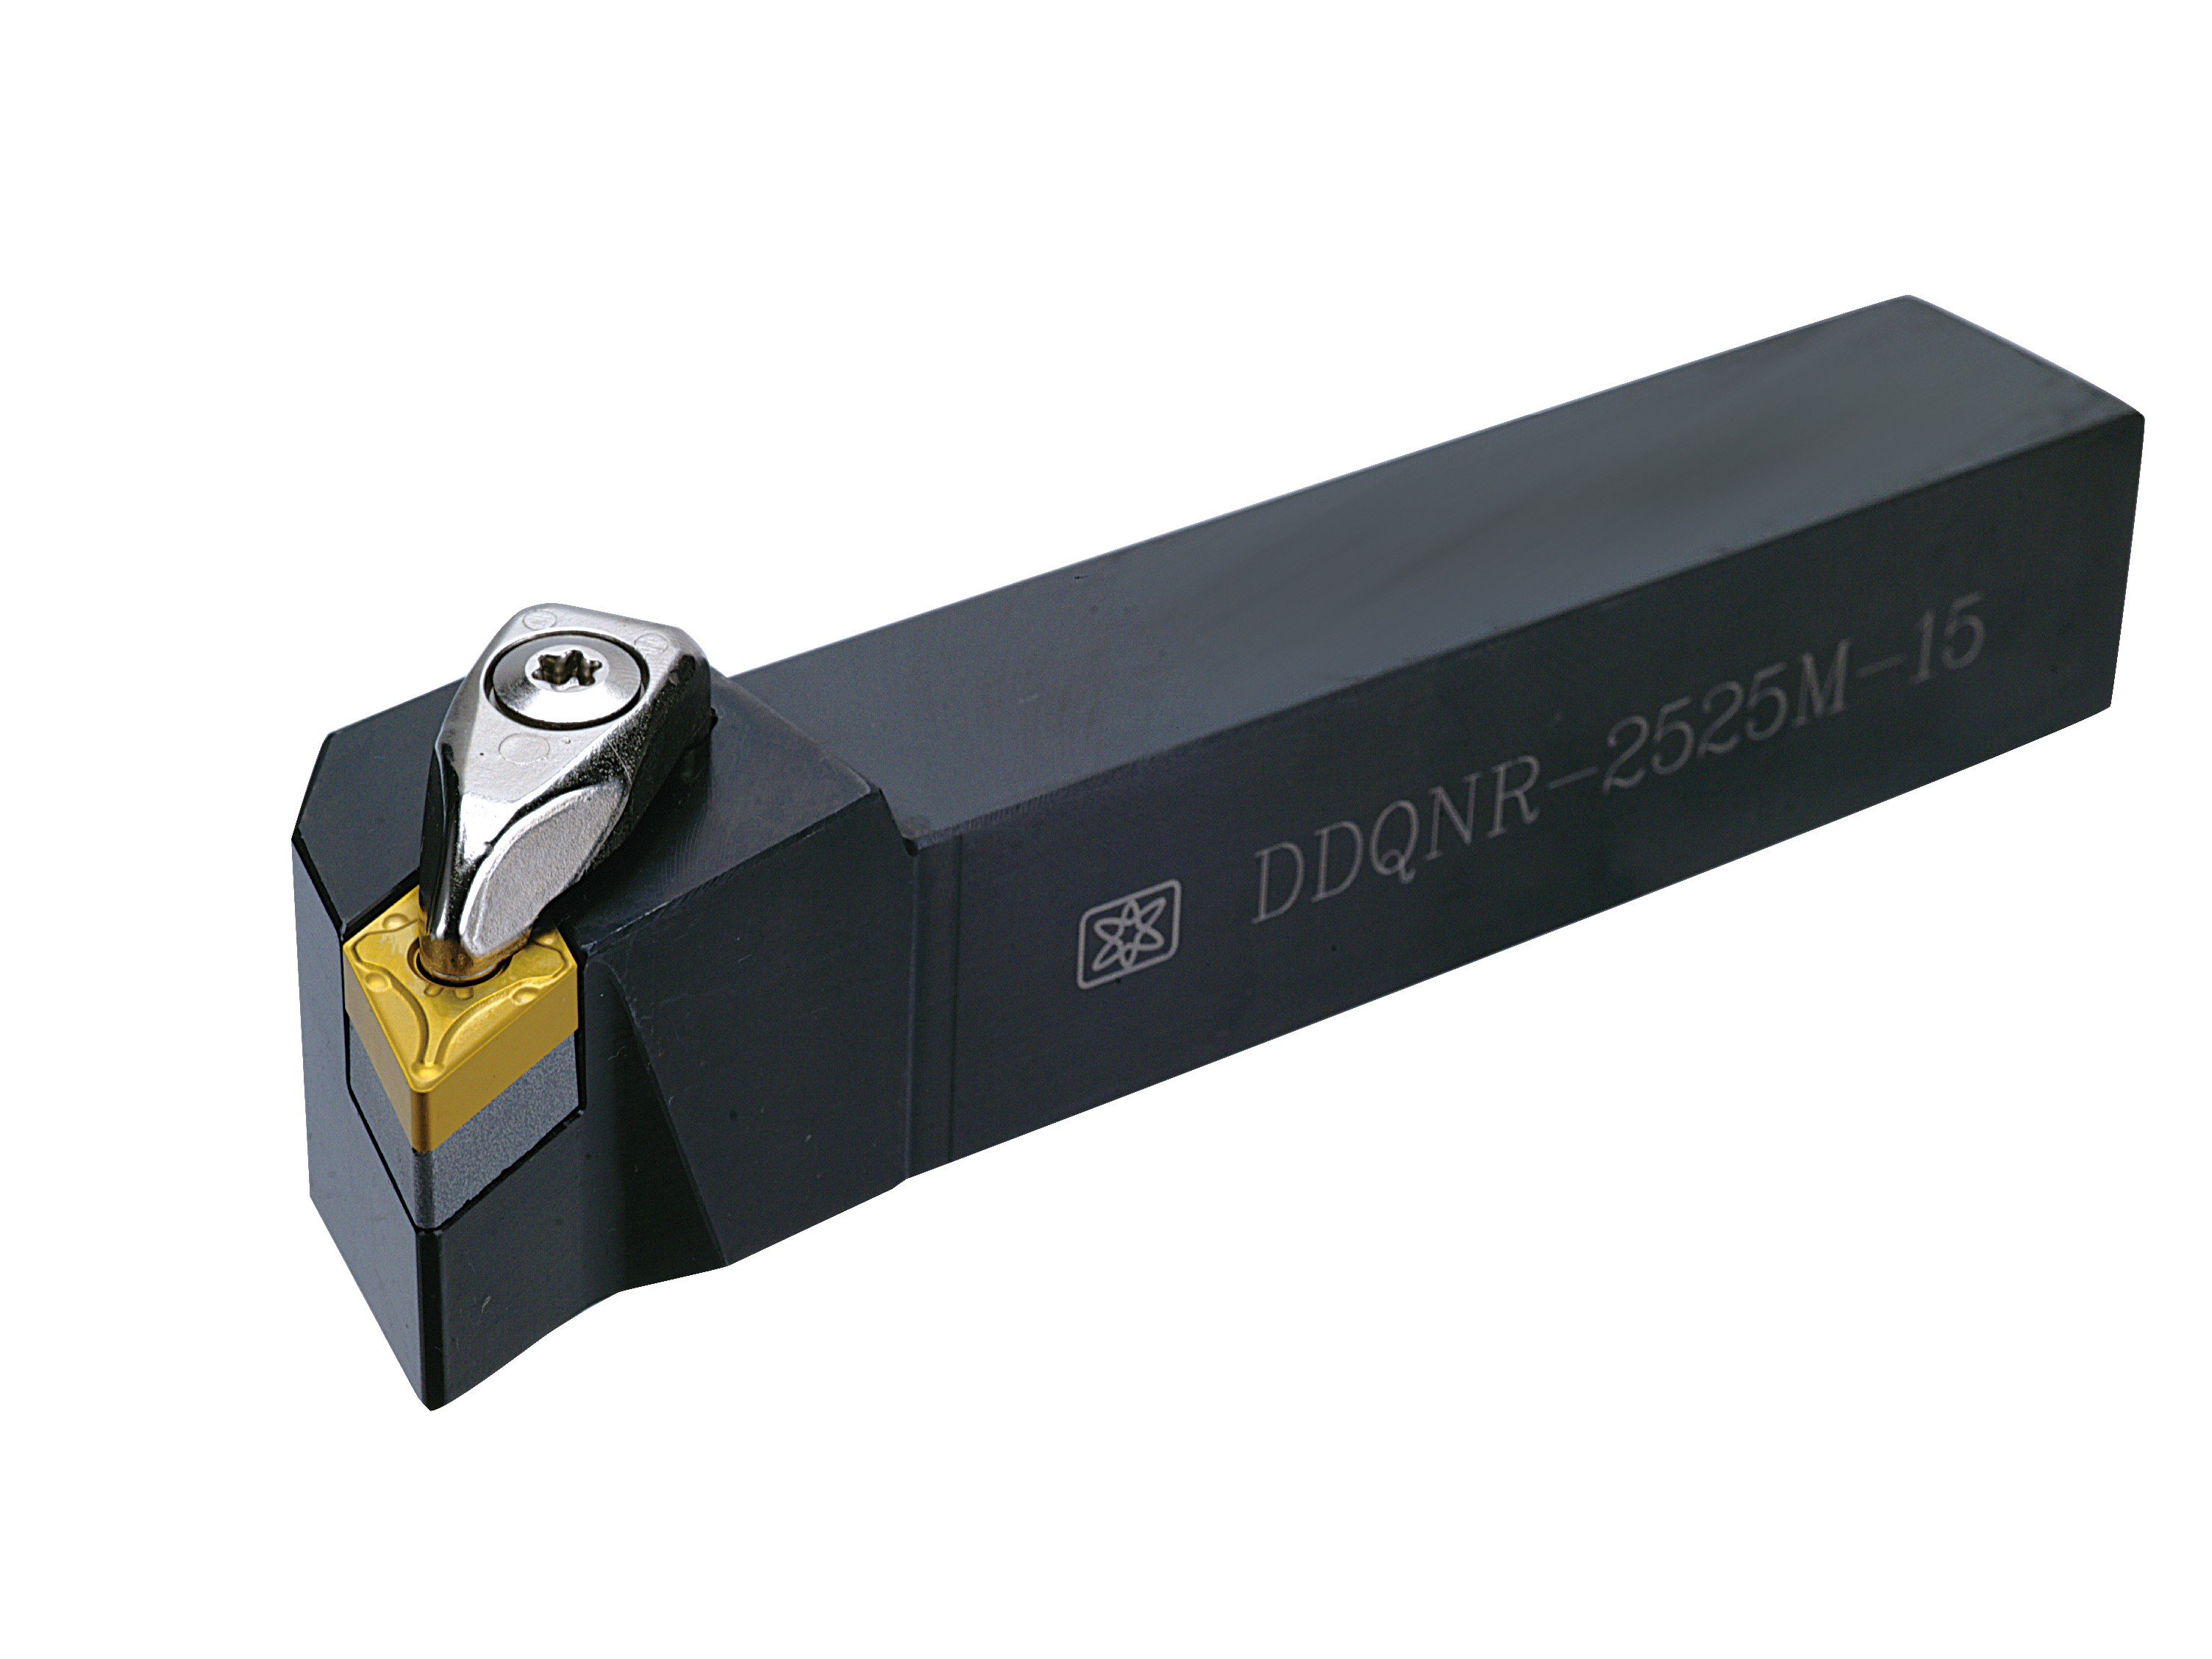 Products|DDQNR (DNMG1504 / DNMG1506) External Turning Tool Holder